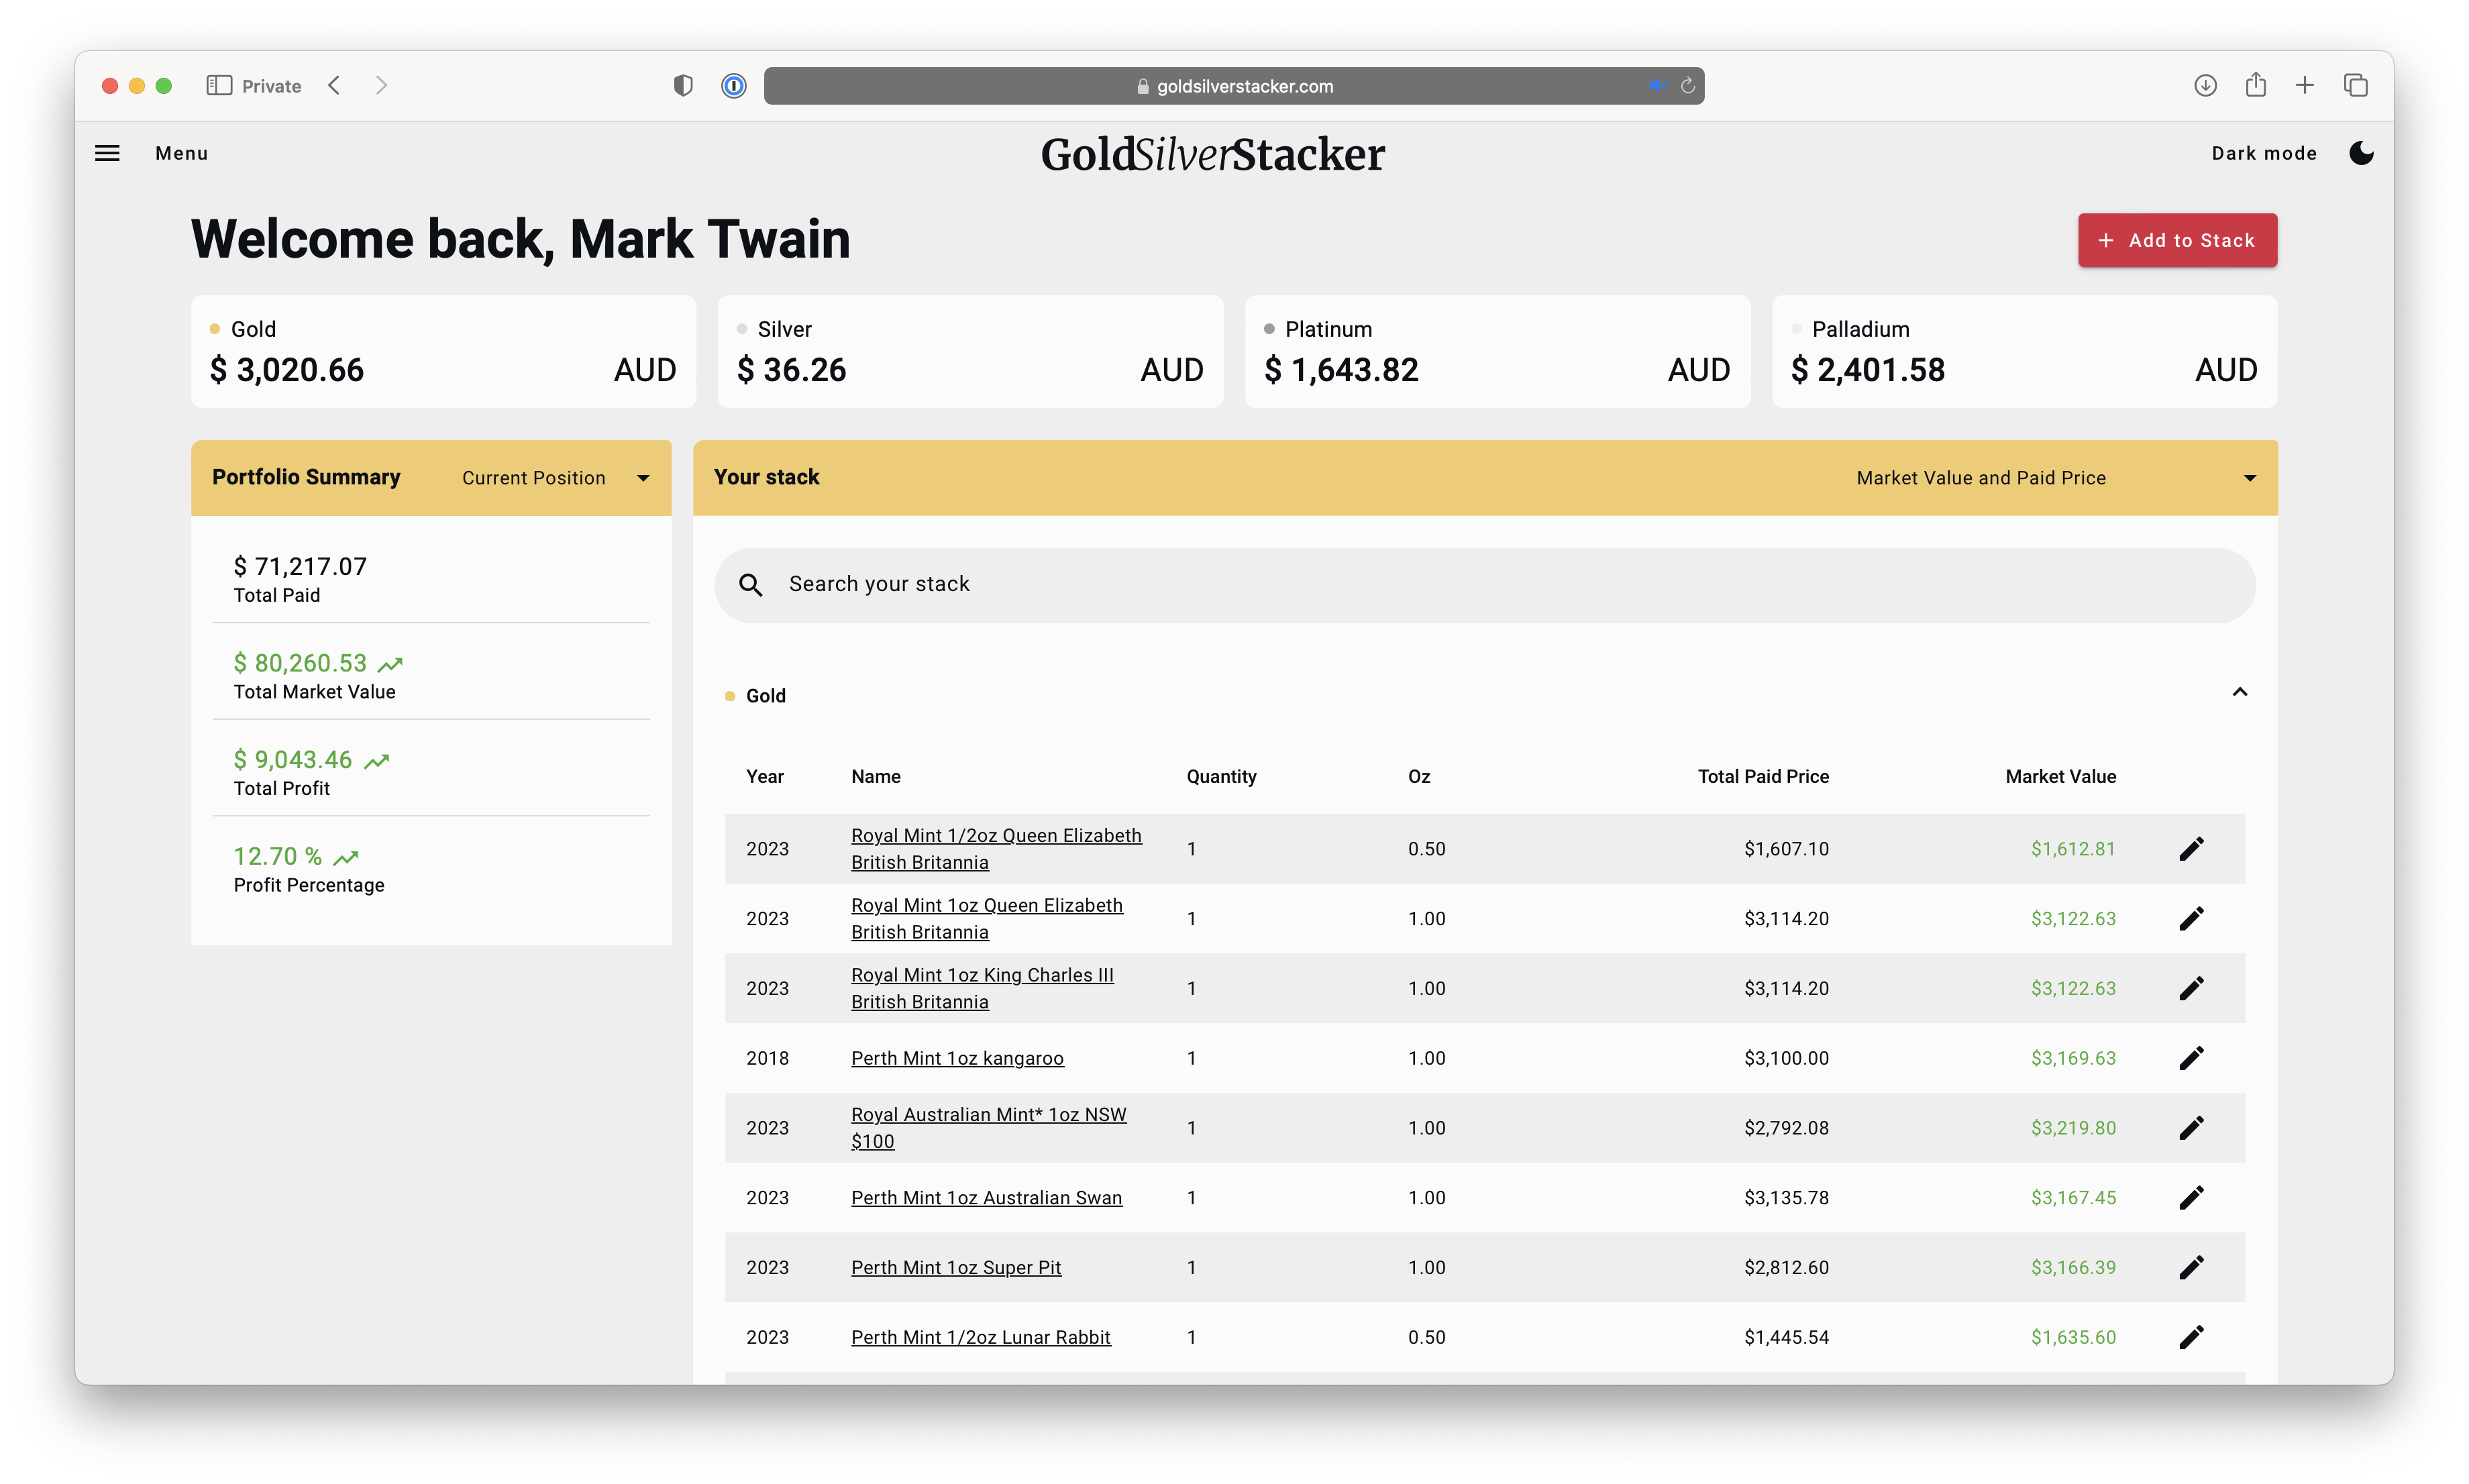 The Benefits of Using a Bullion Tracker for Precious Metals Investment